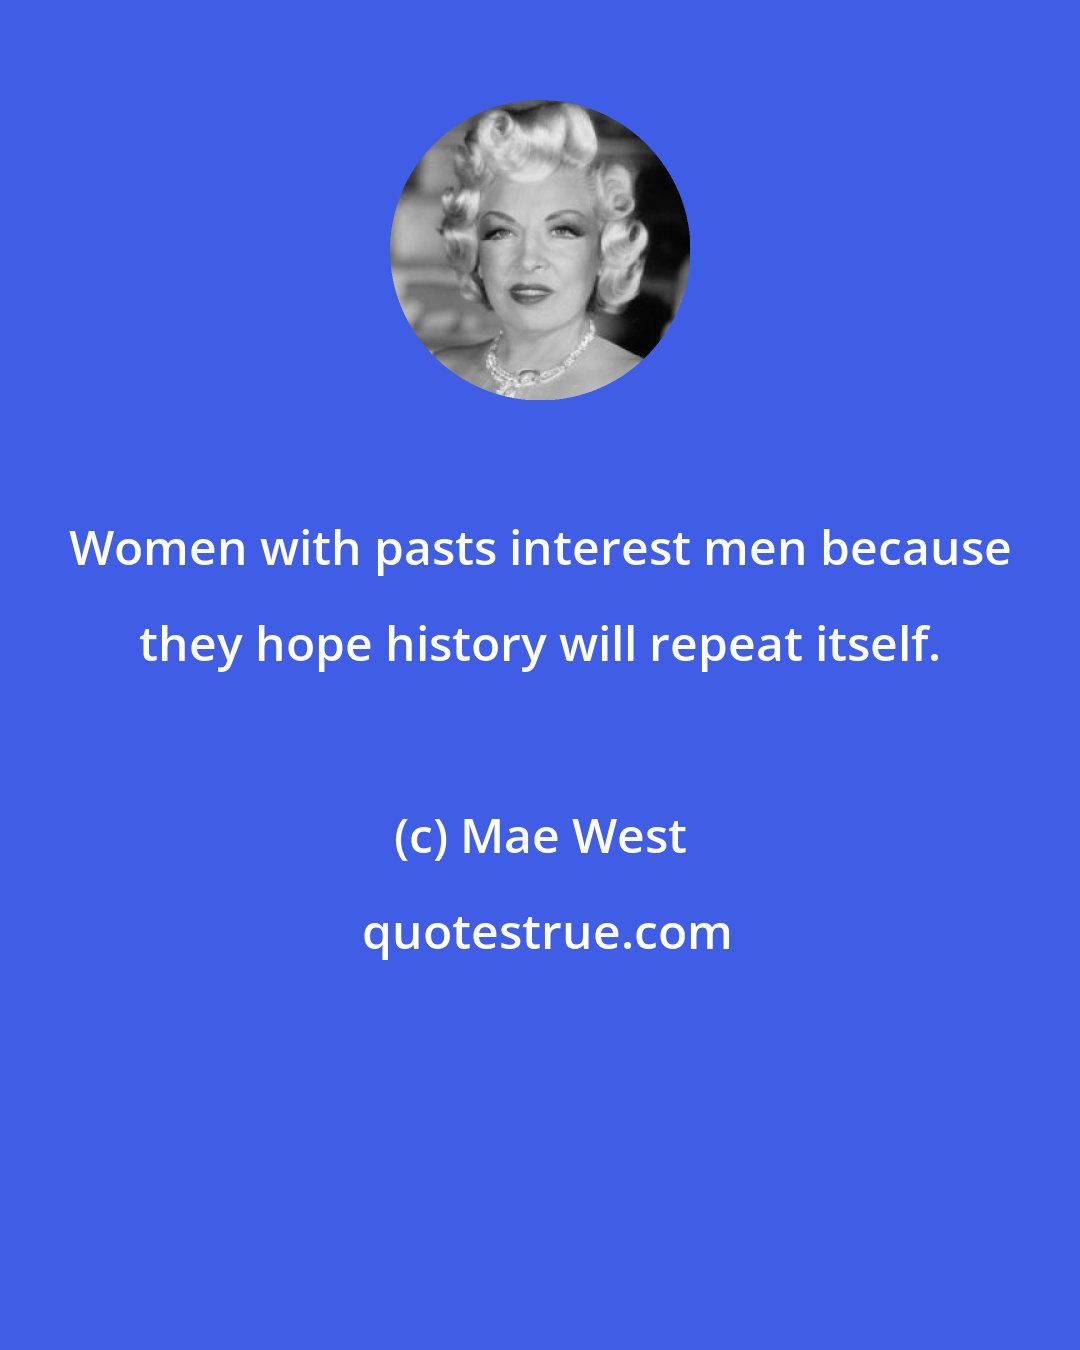 Mae West: Women with pasts interest men because they hope history will repeat itself.